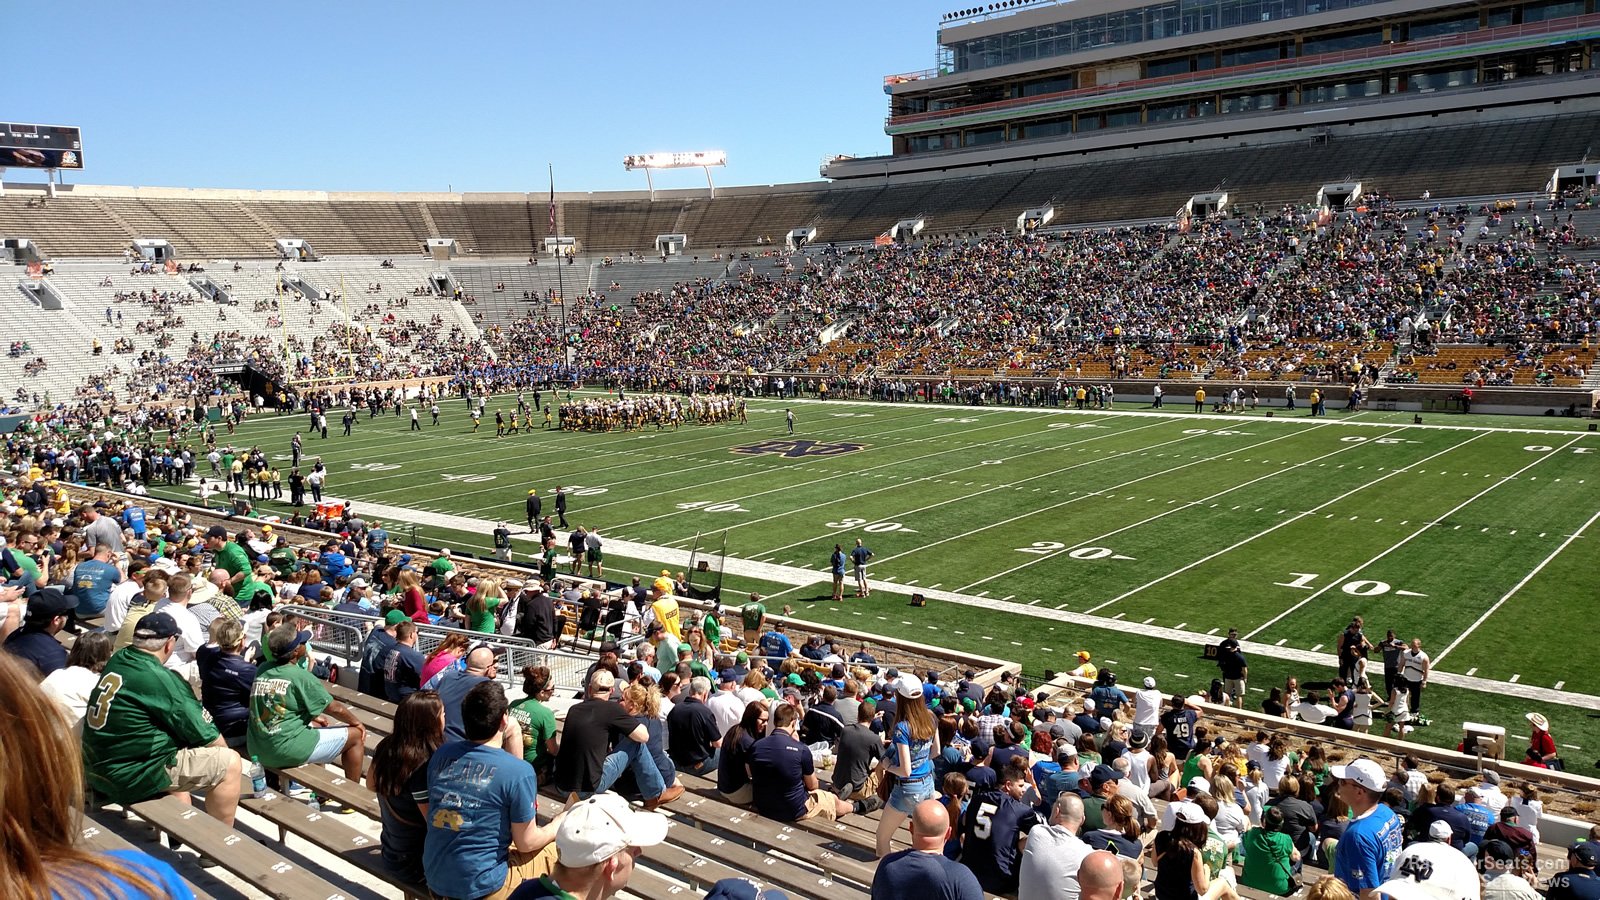 section 24, row 35 seat view  - notre dame stadium